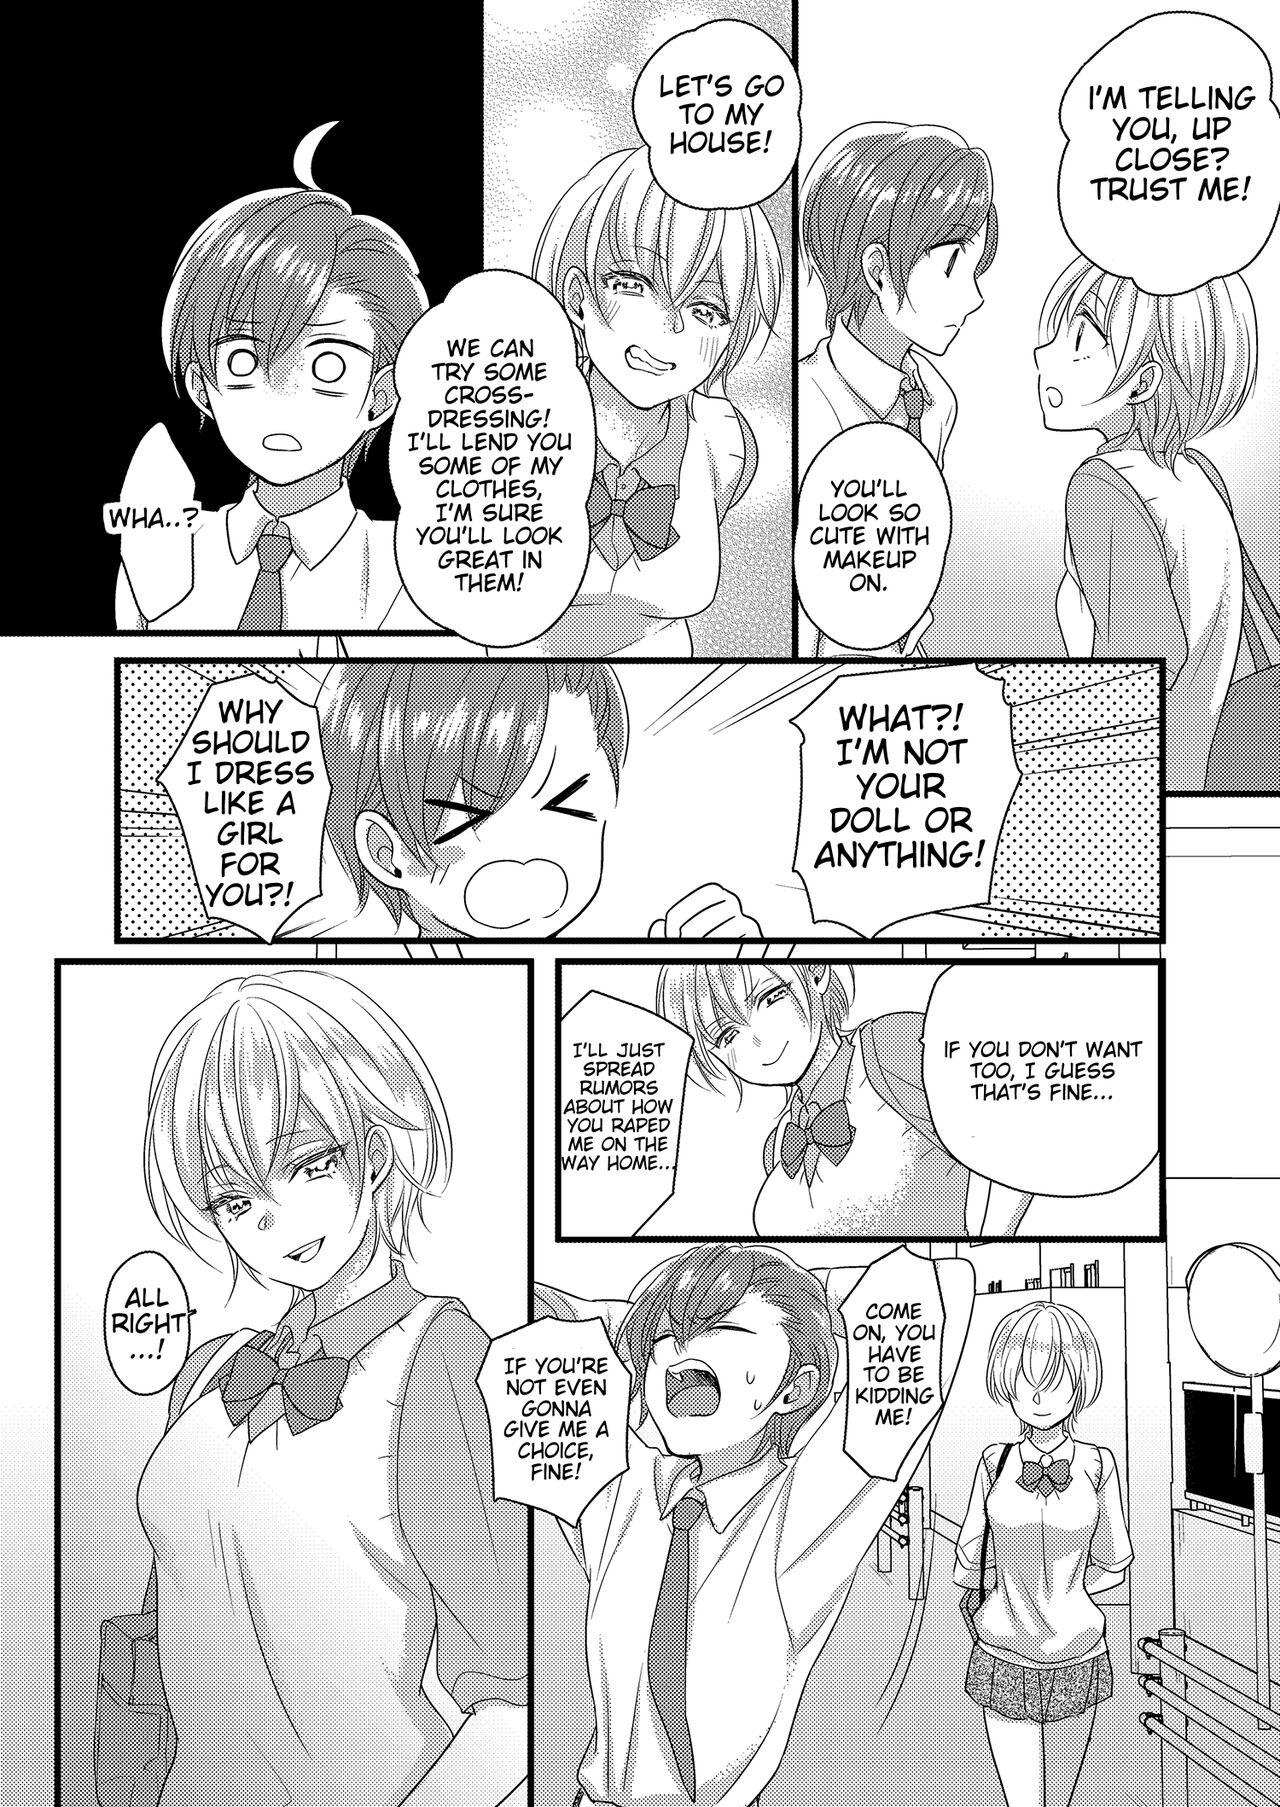 Perverted Haru and Sana ～Love Connected Through Cosplay～ - Original Culo - Page 8